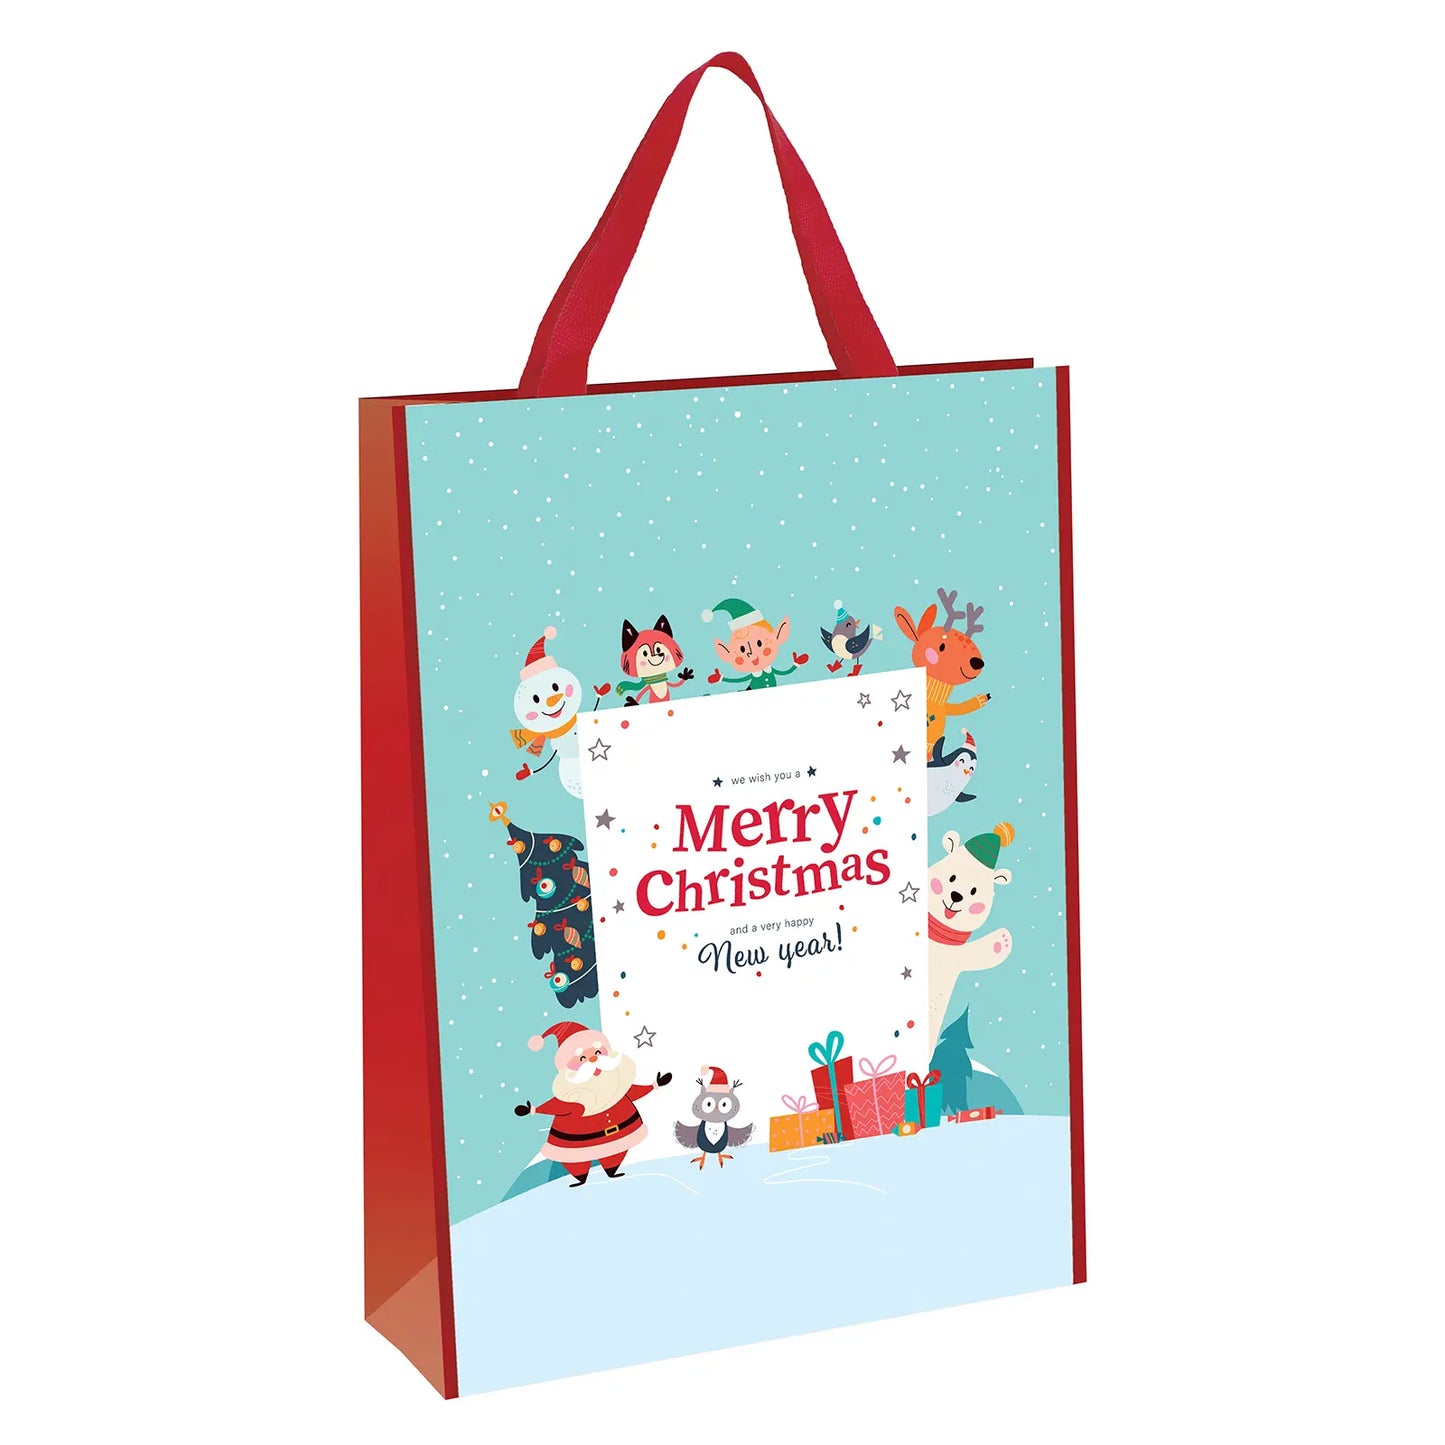 blue snow gift bag featuring red handles with merry christmas slogan surrounded by adorable festive friends